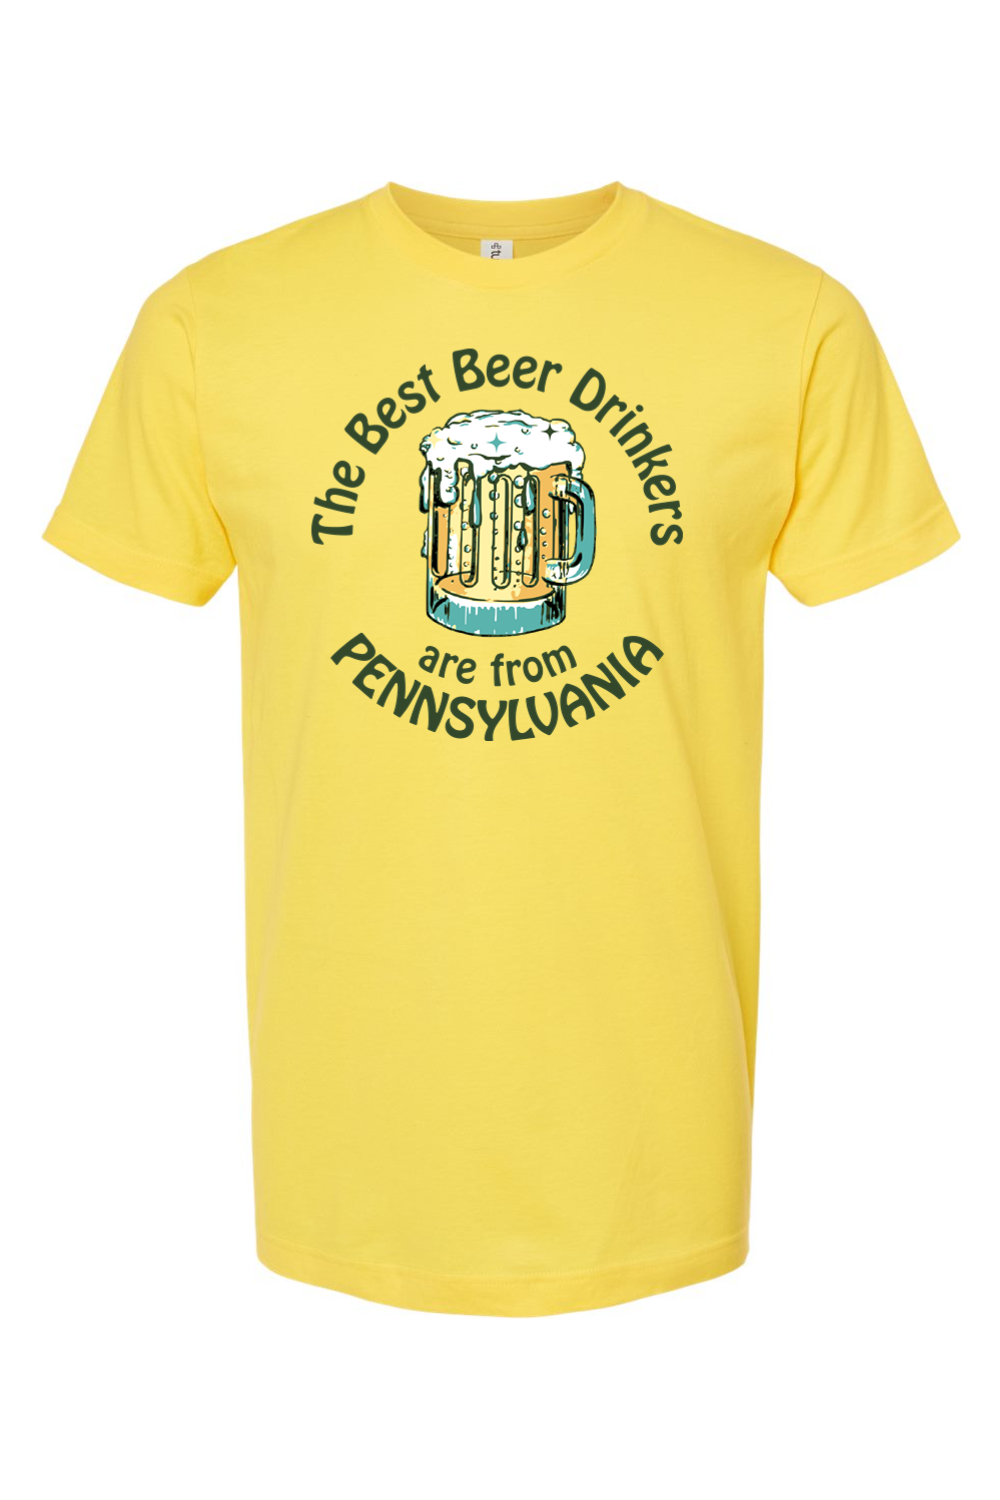 The Best Beer Drinkers are from Pennsylvania - Yinzylvania